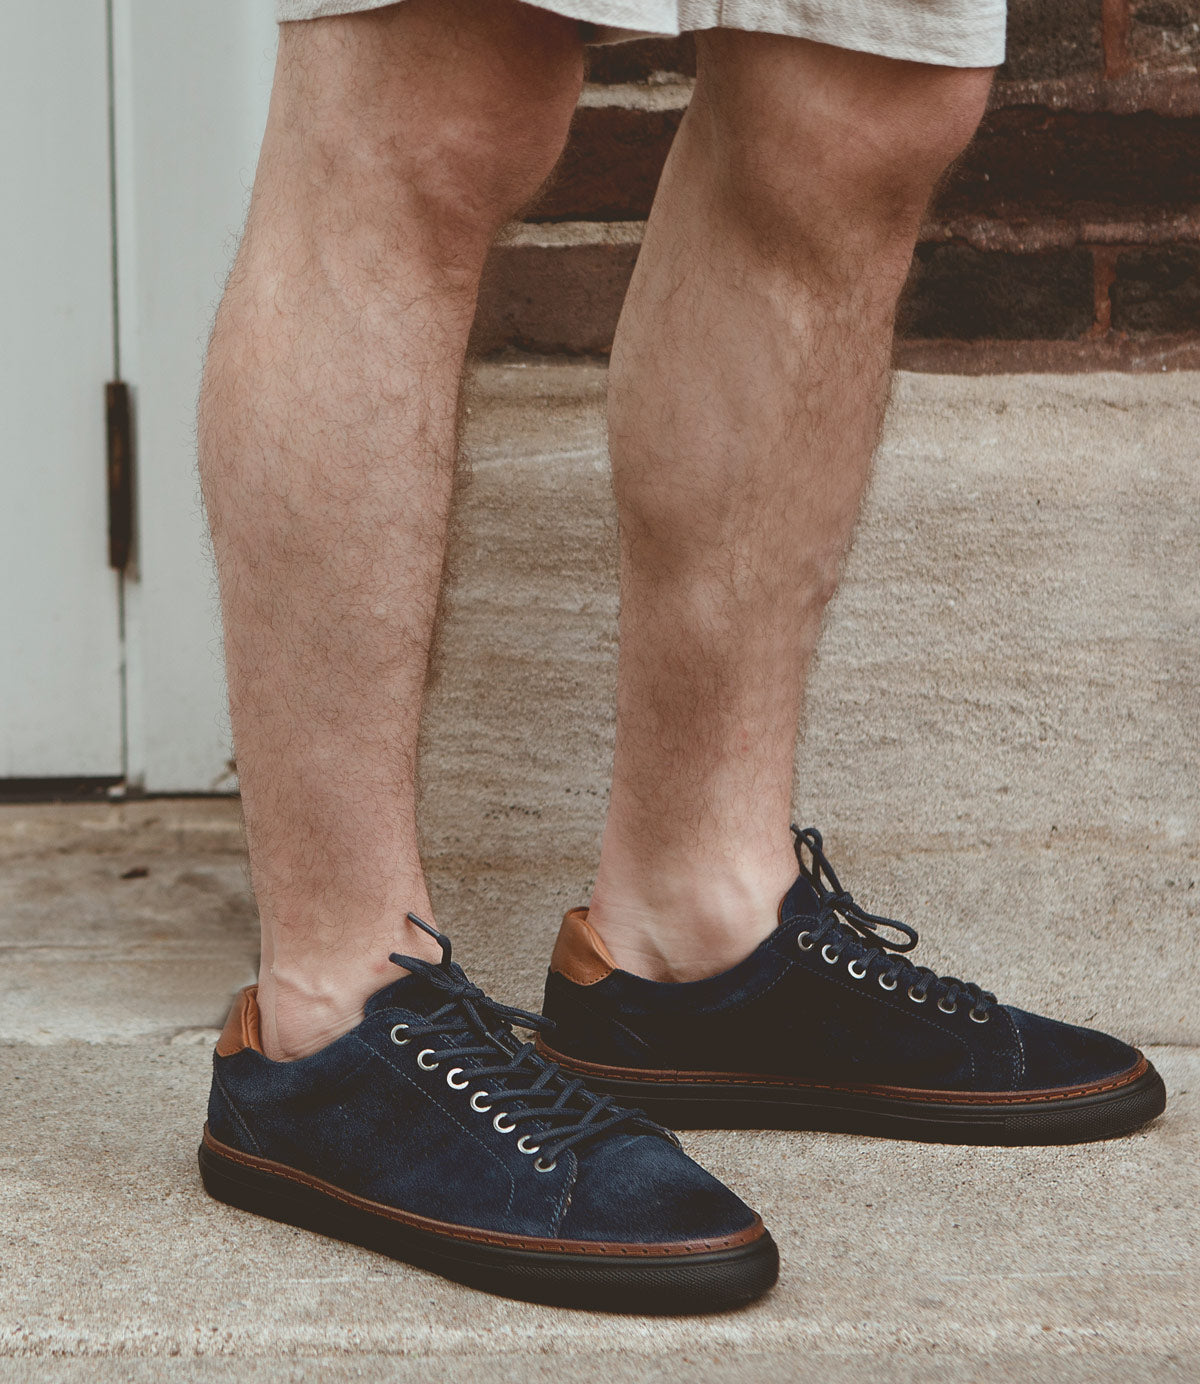 
                  
                    A person wearing versatile blue suede Roan Albright sneakers with brown accents and beige shorts stands on concrete steps near a brick wall.
                  
                